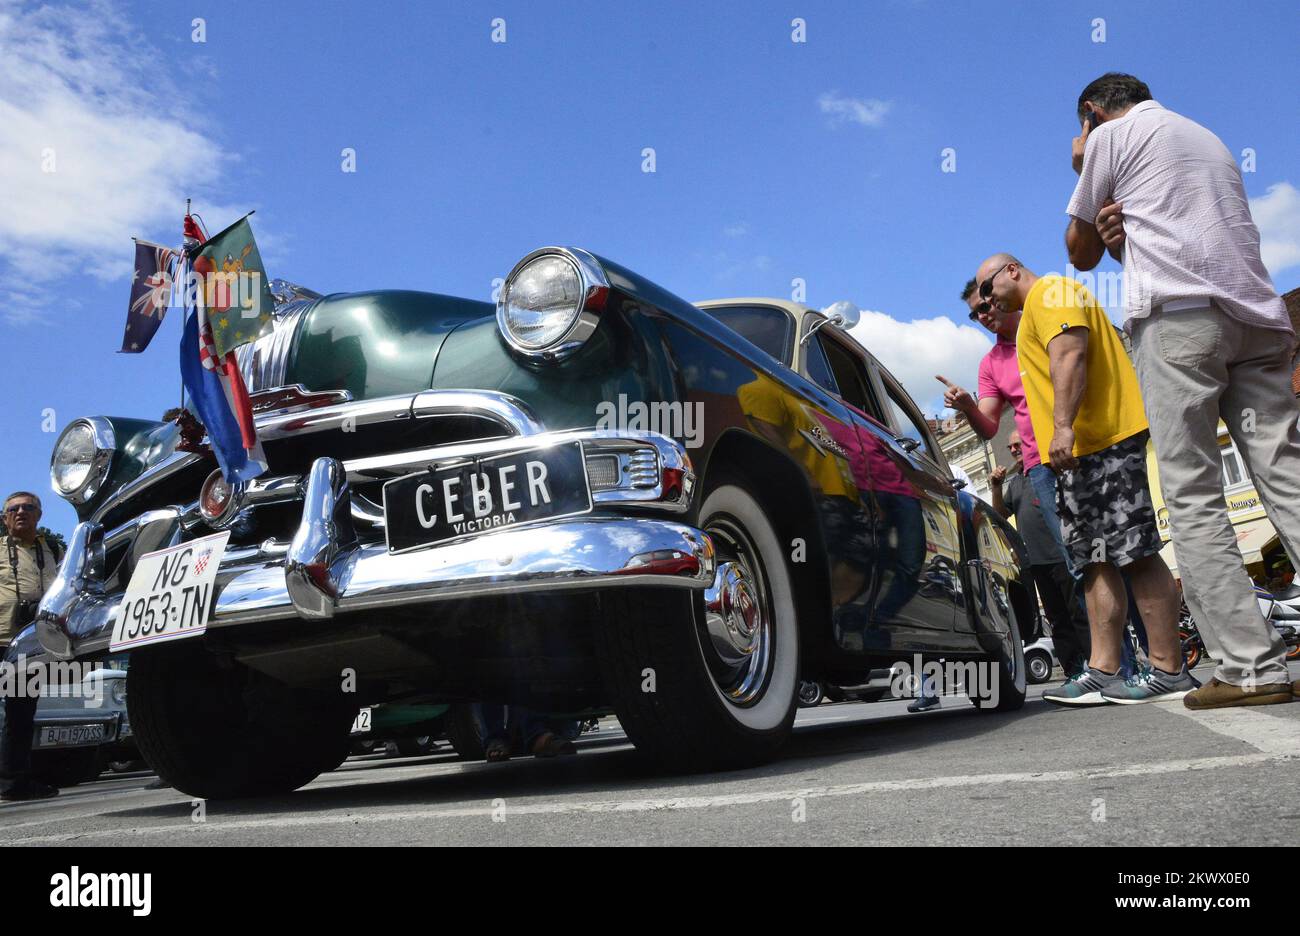 13.08.2016., Pozega, Croatia - Oldtimer Club Trophy Pozega organized the Fourth International Oldtimer meeting called Trophy Golden Valley 2016. Citizens had a chance to see historical vehicles and a rally of vintage cars.   Stock Photo